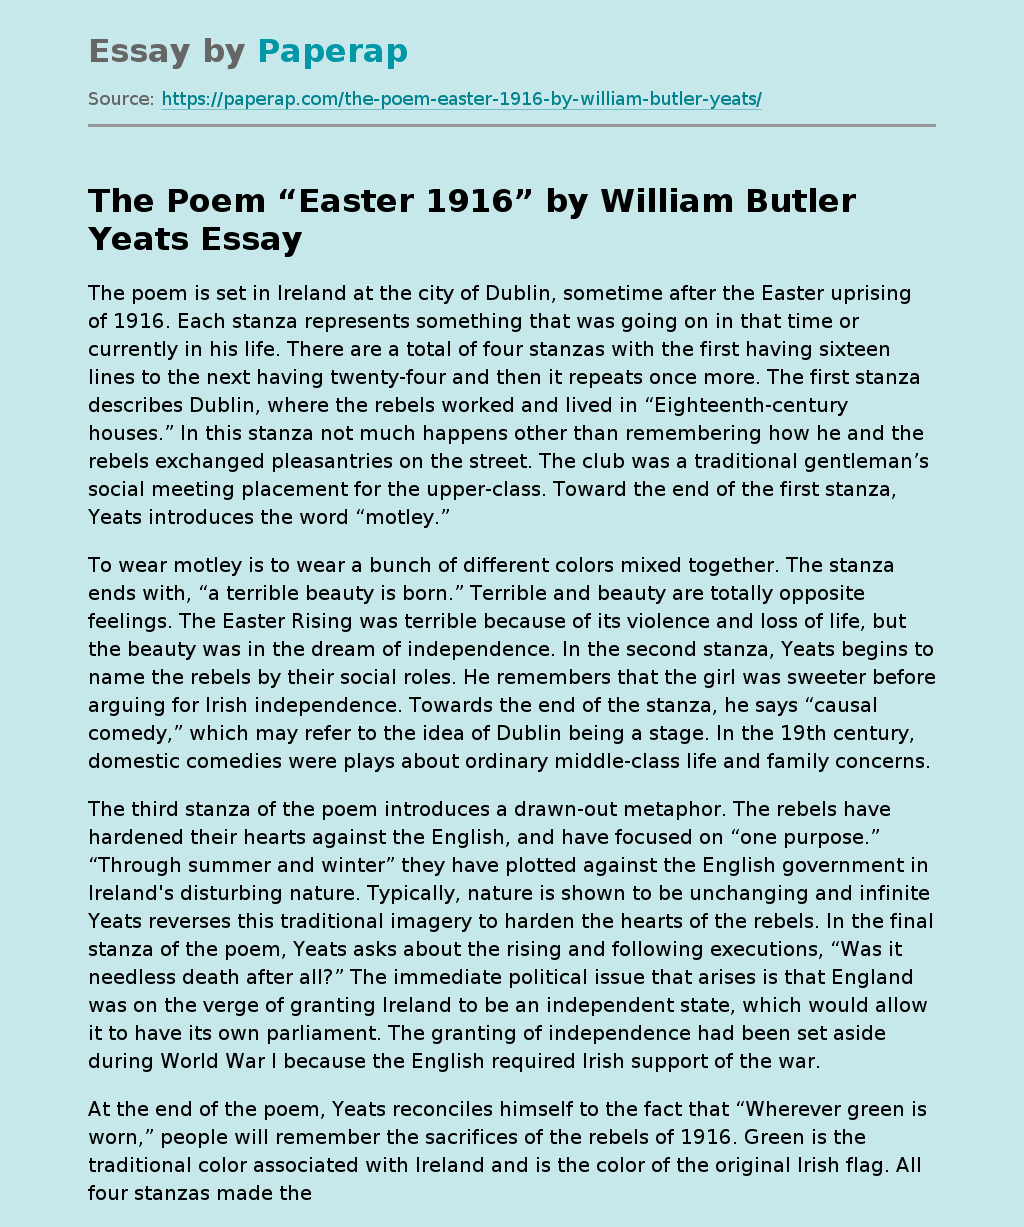 The Poem “Easter 1916” by William Butler Yeats